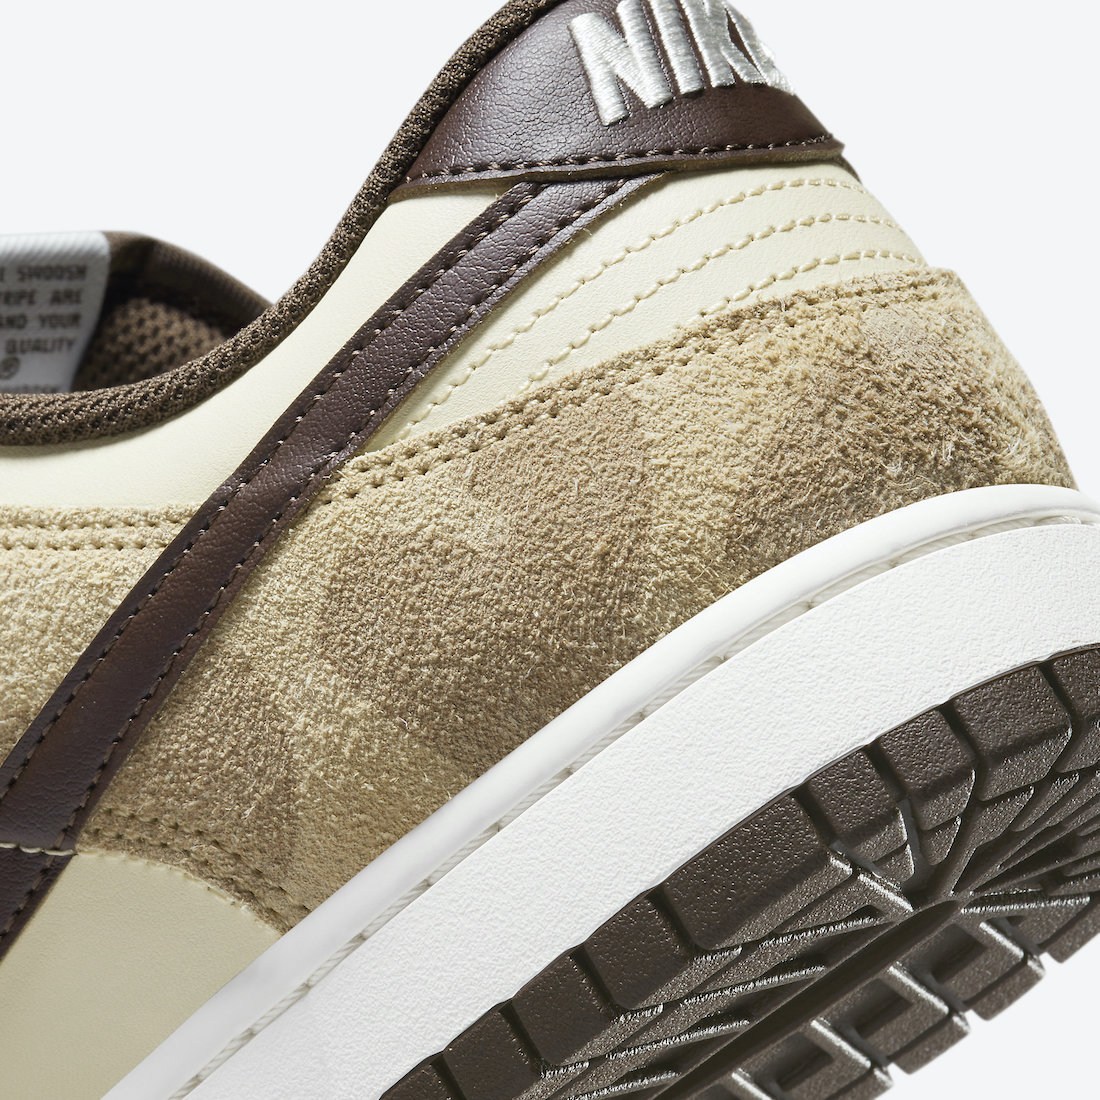 Nike-Dunk-Low-Animal-DH7913-200-Release-Date-7